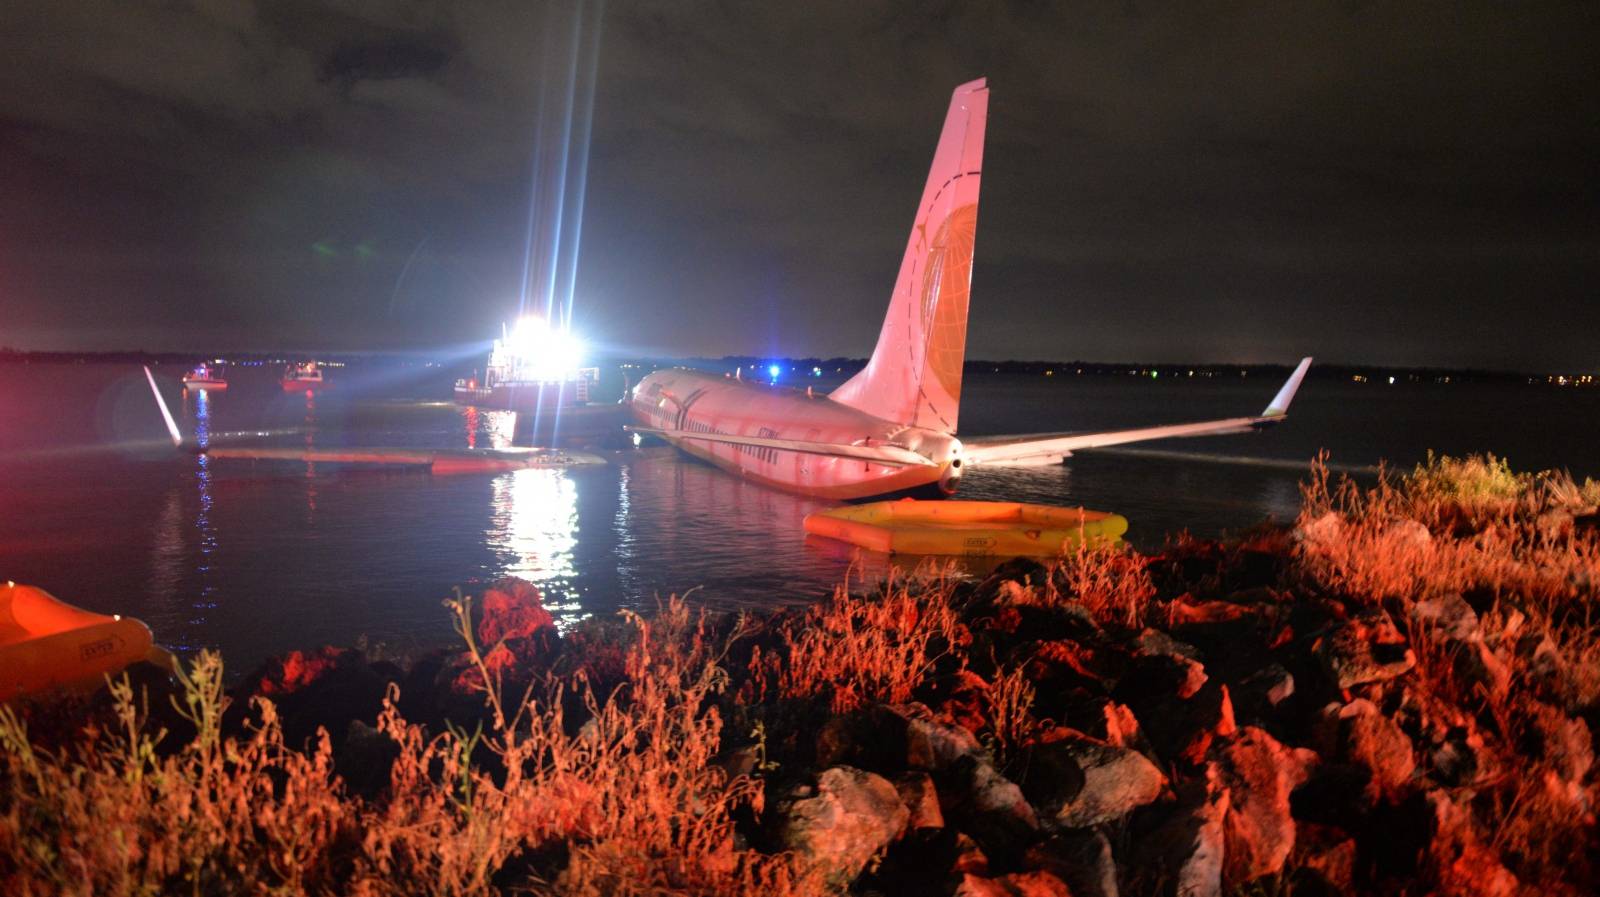 Boeing 737 aircraft  sits in shallow water of the St Johns River after it slid off the runway at Naval Air Station, Jacksonville, Florida